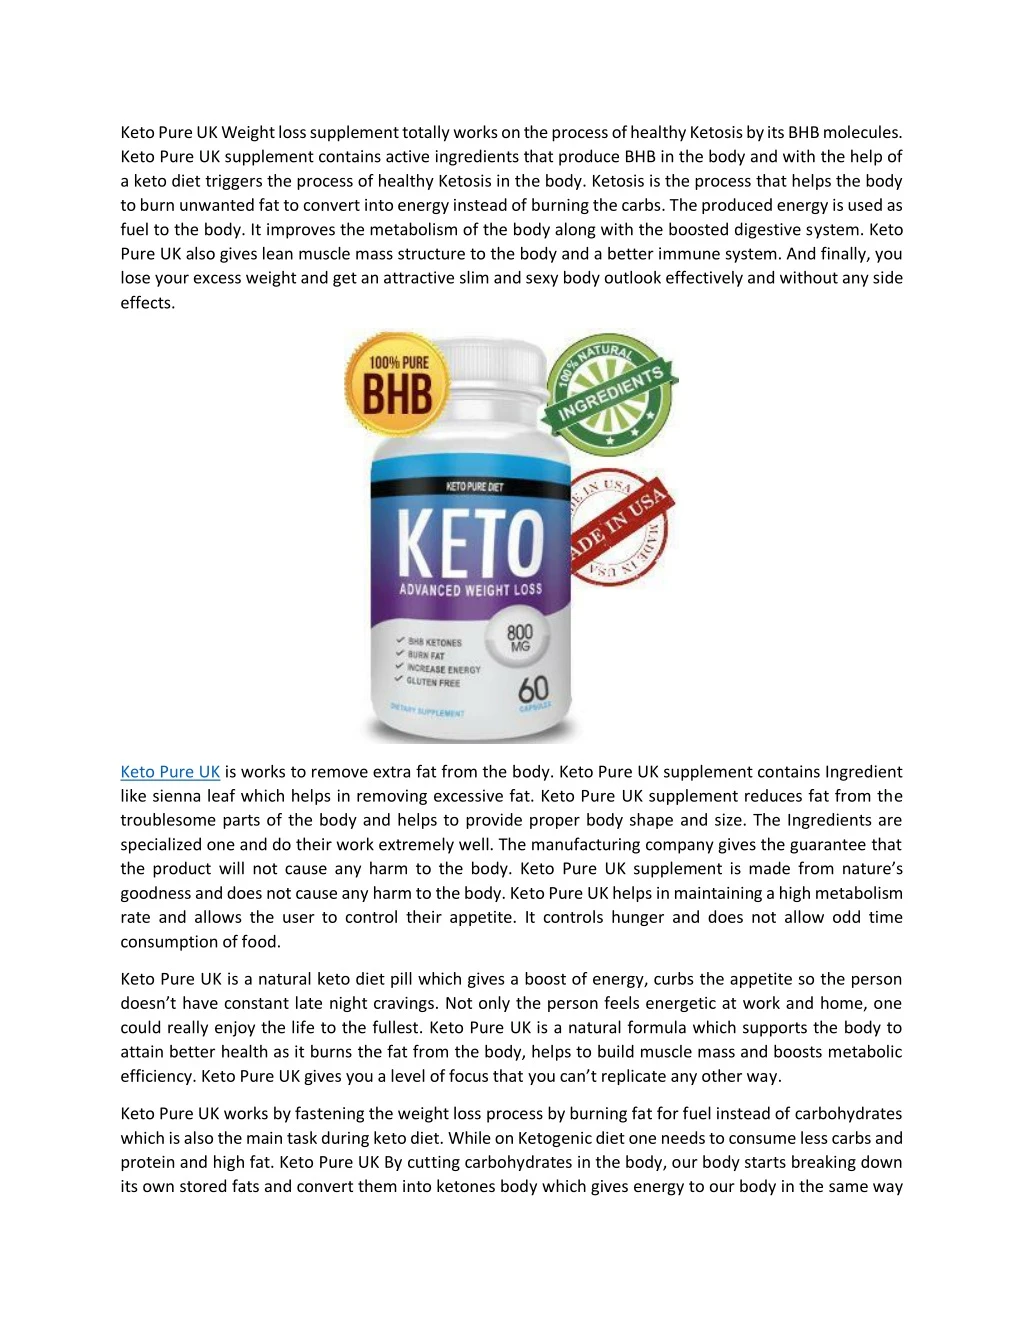 keto pure uk weight loss supplement totally works n.